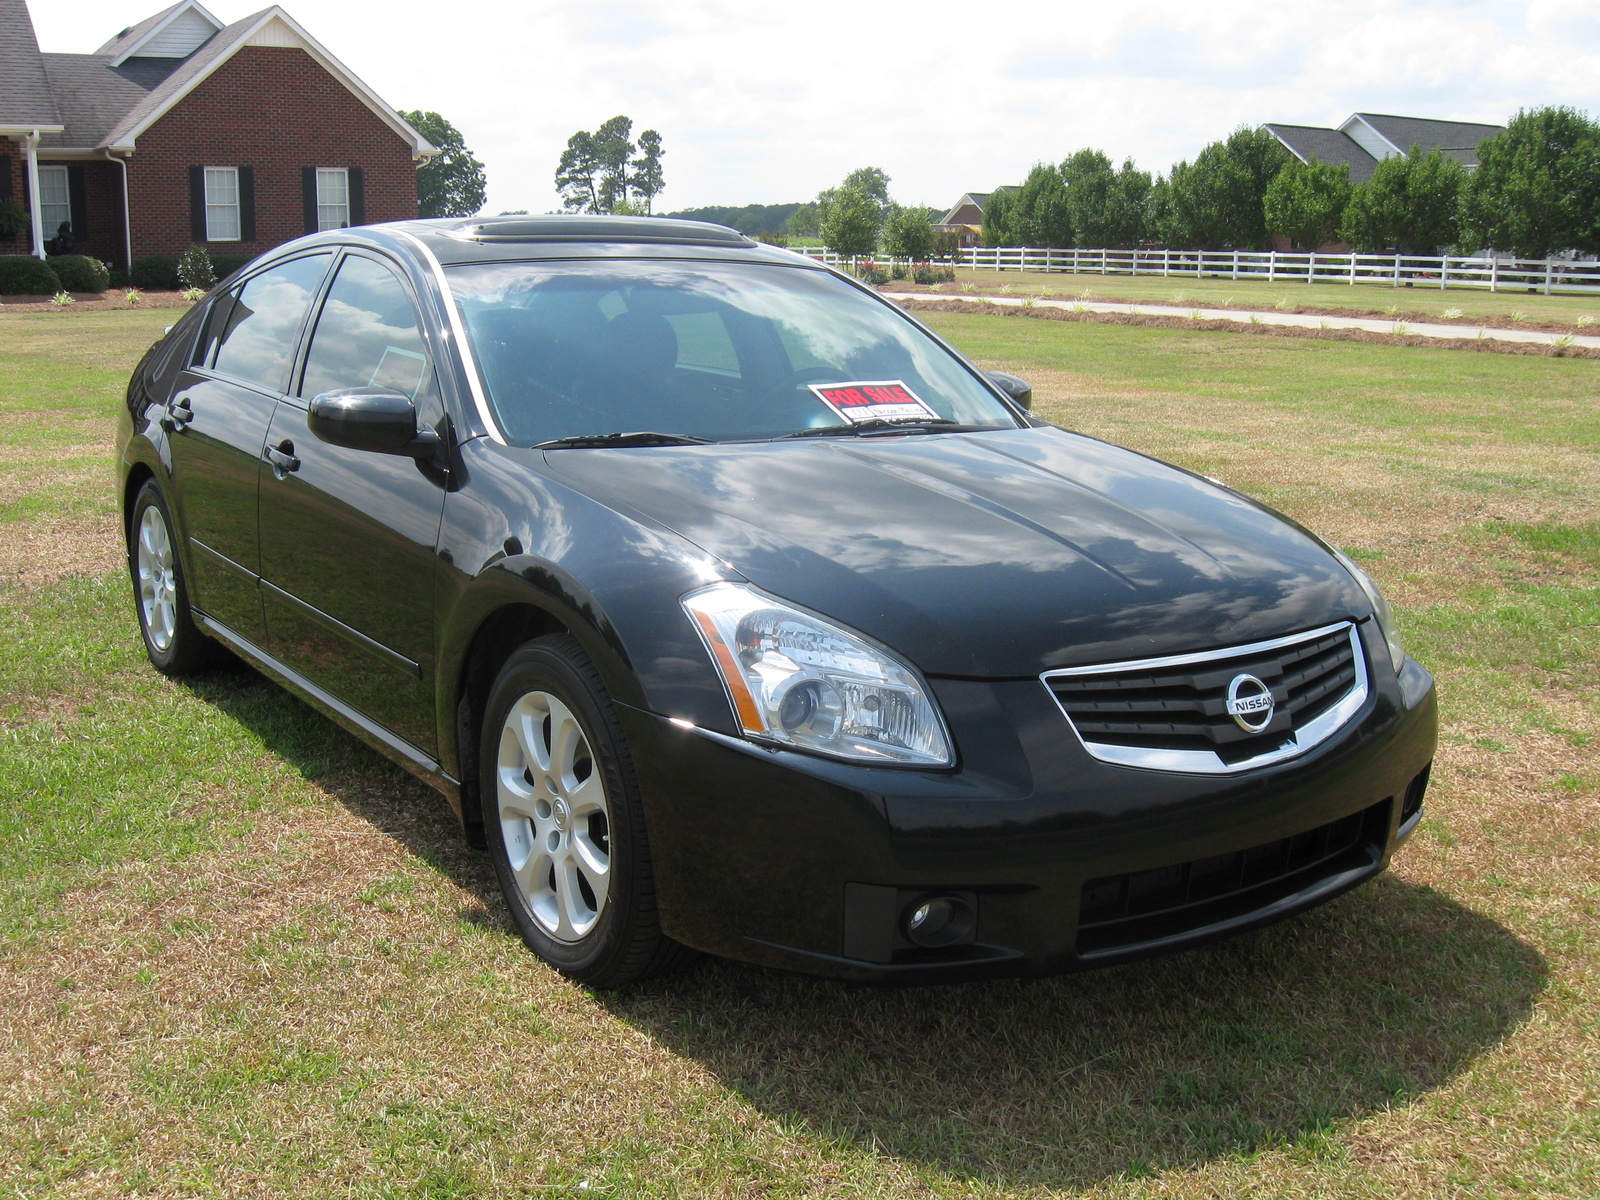 Review of 2007 nissan maxima #3